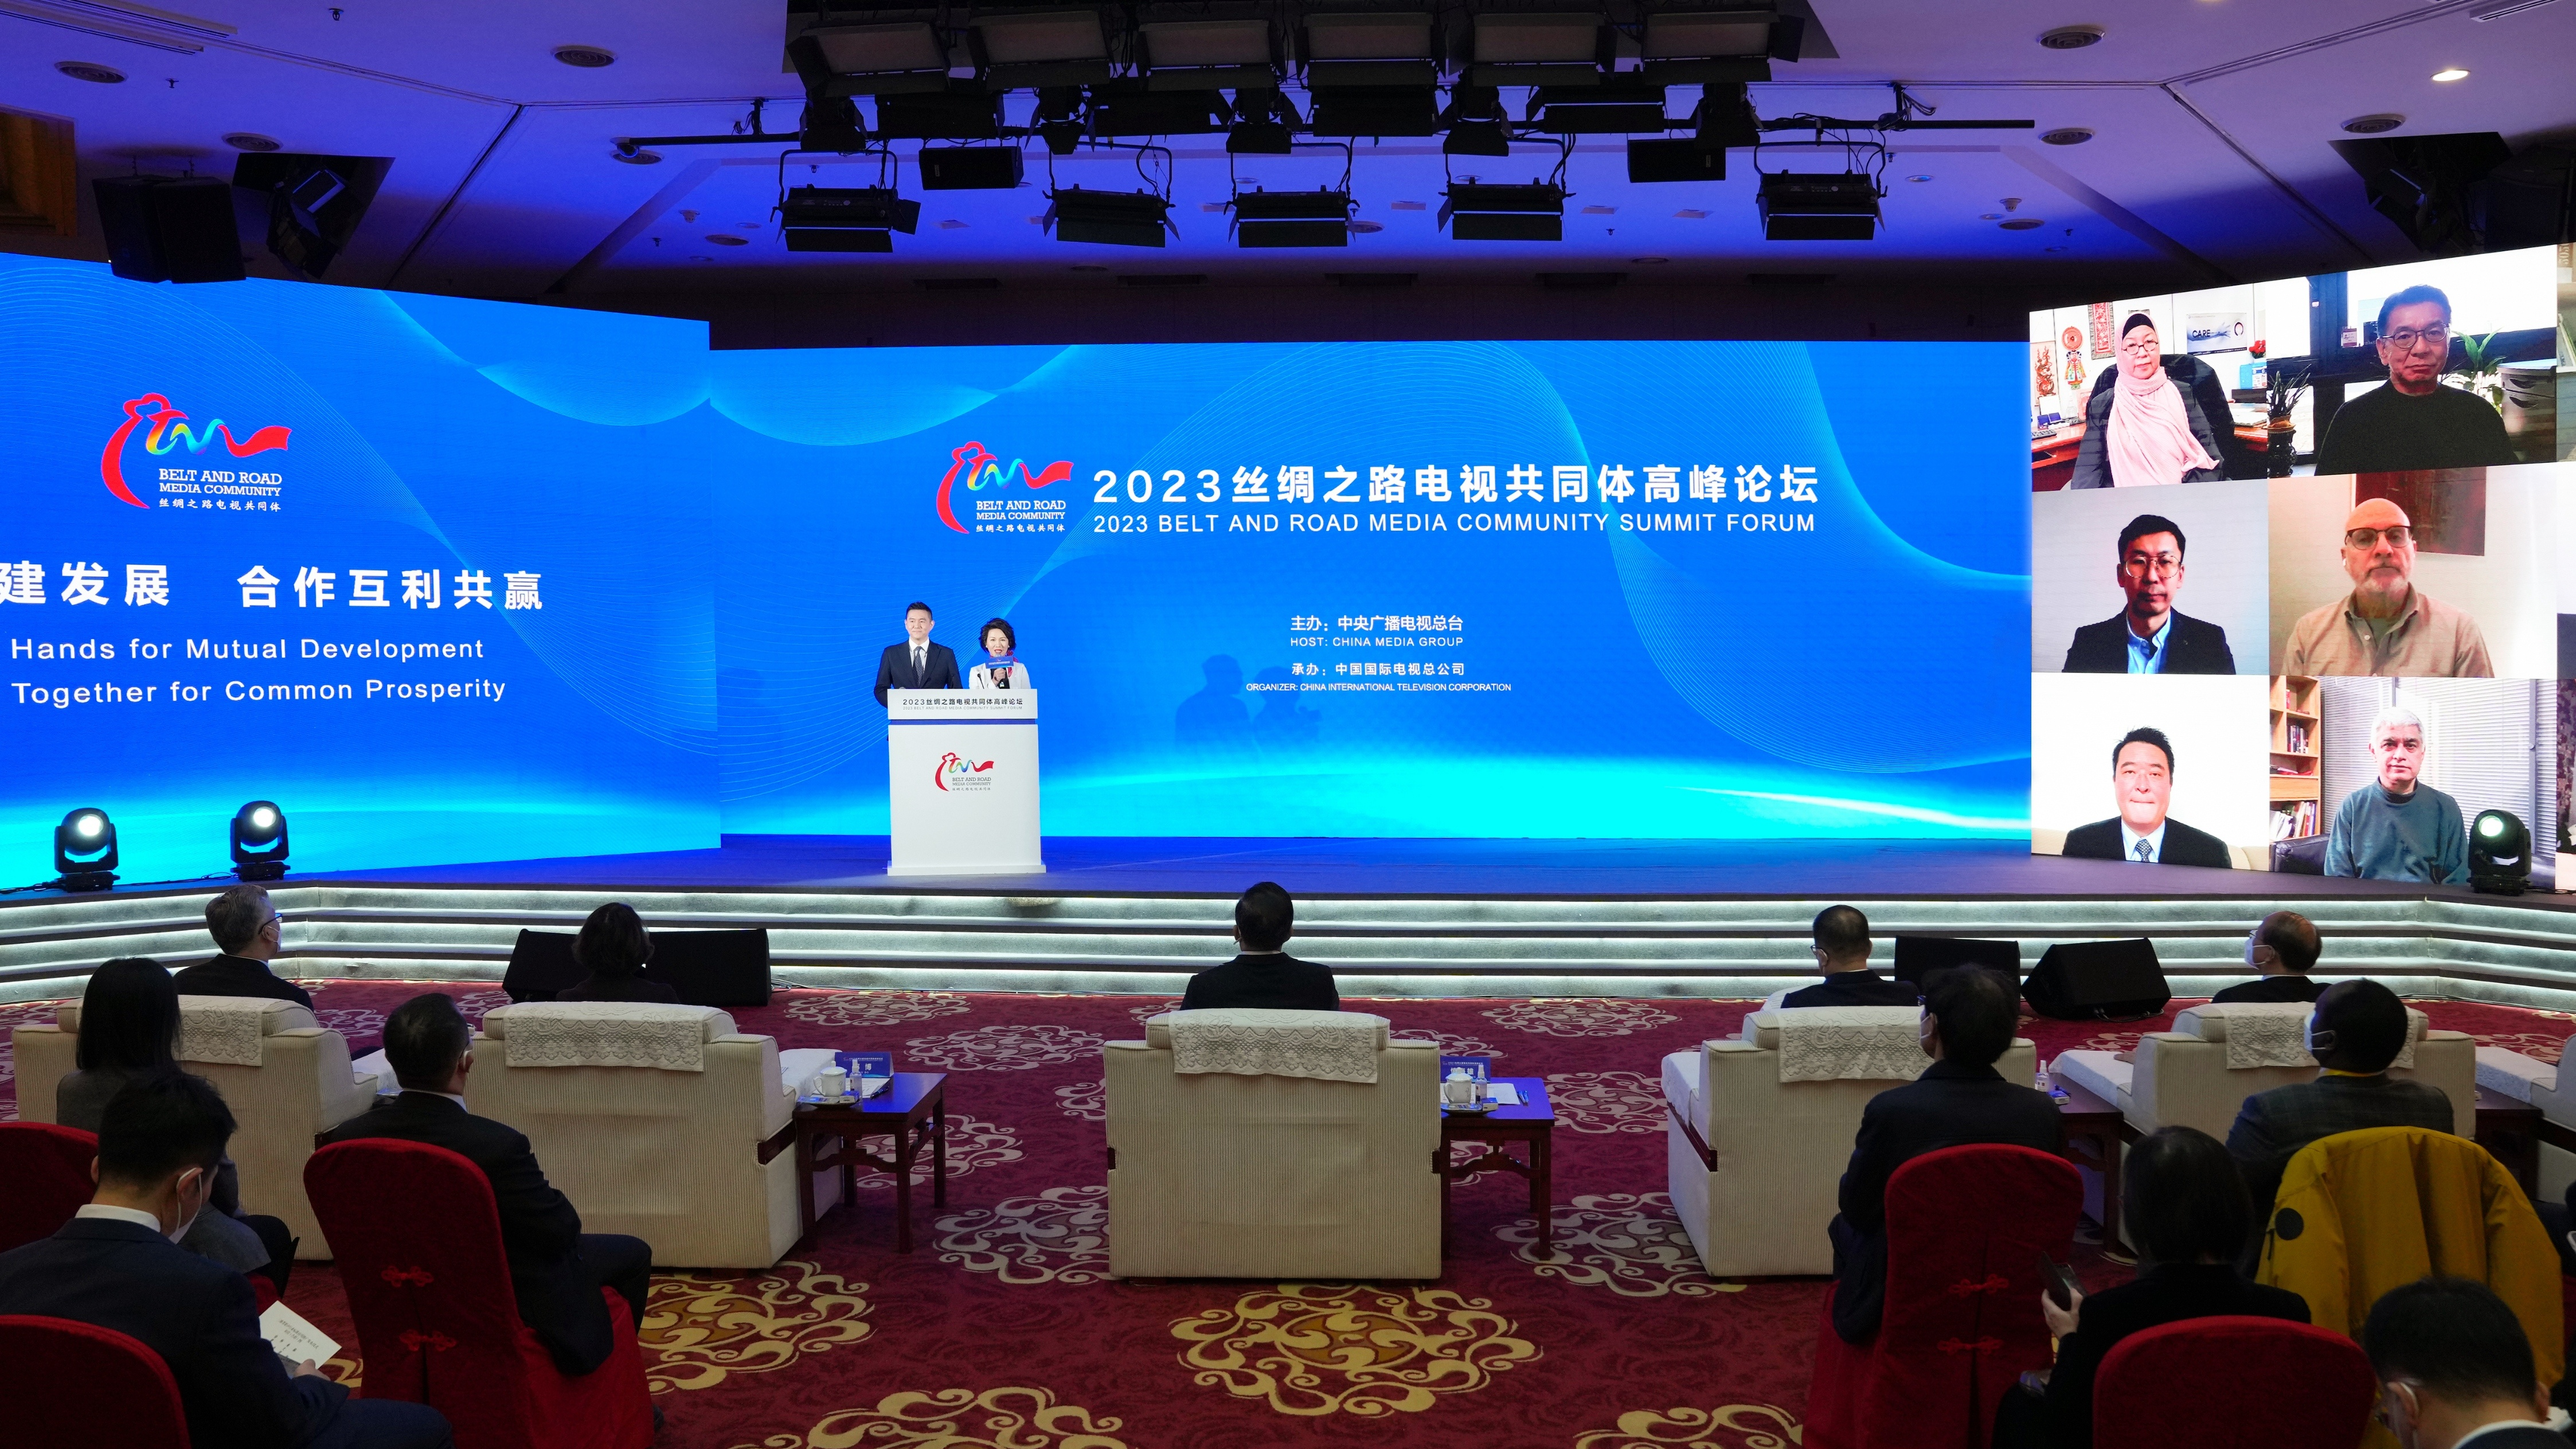 The 2023 Belt and Road Media Community Summit Forum is held in Beijing, on February 14, 2023. /CMG